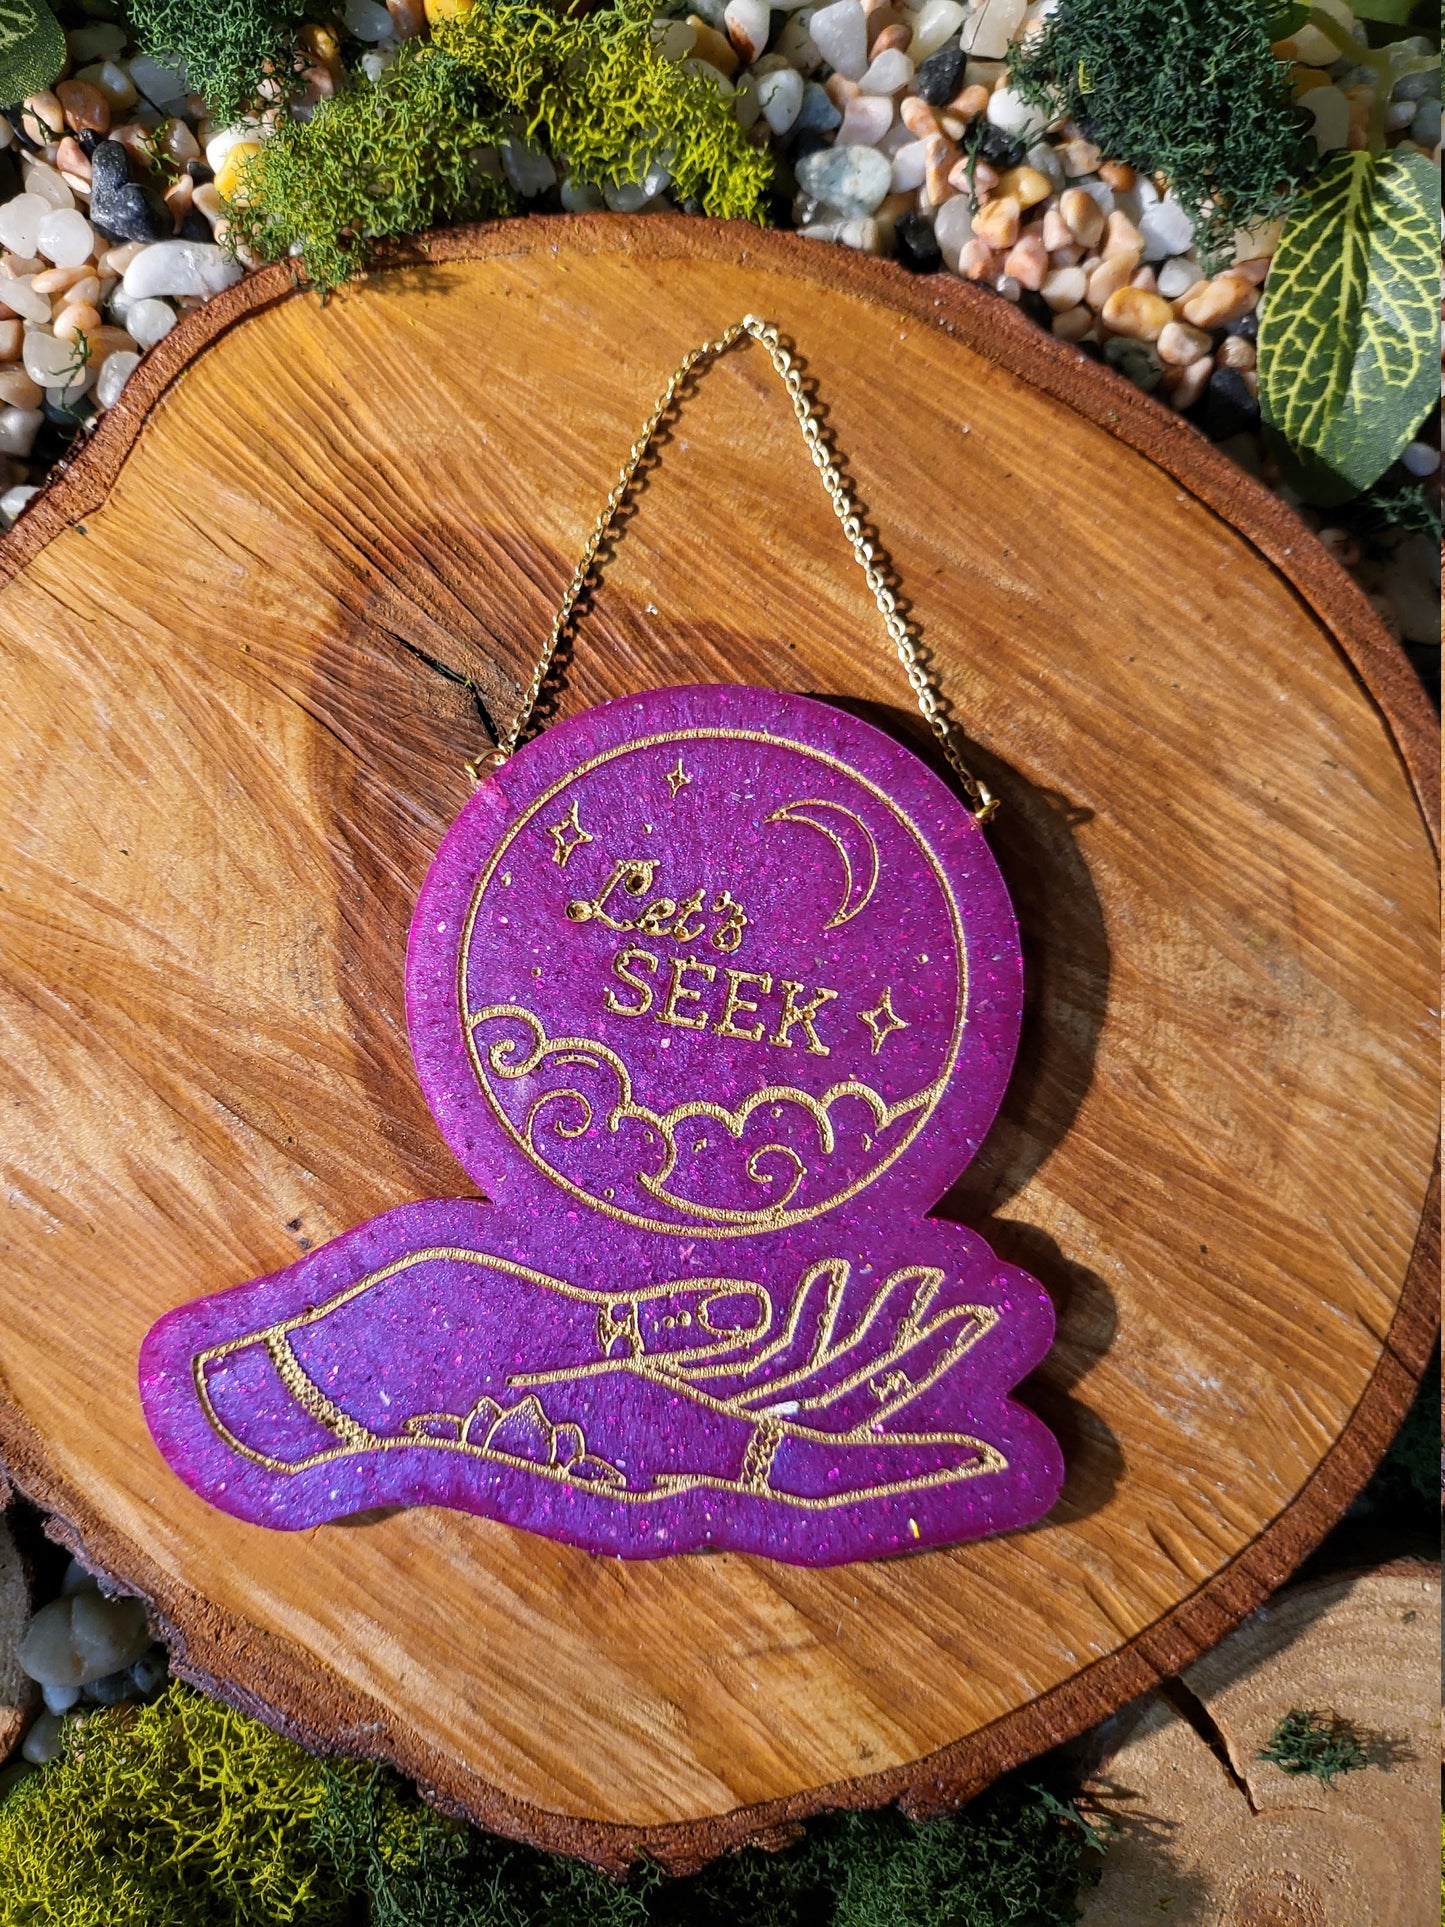 Hot Pink and Gold 'Let's Seek' Crystal Ball Wall Hanging